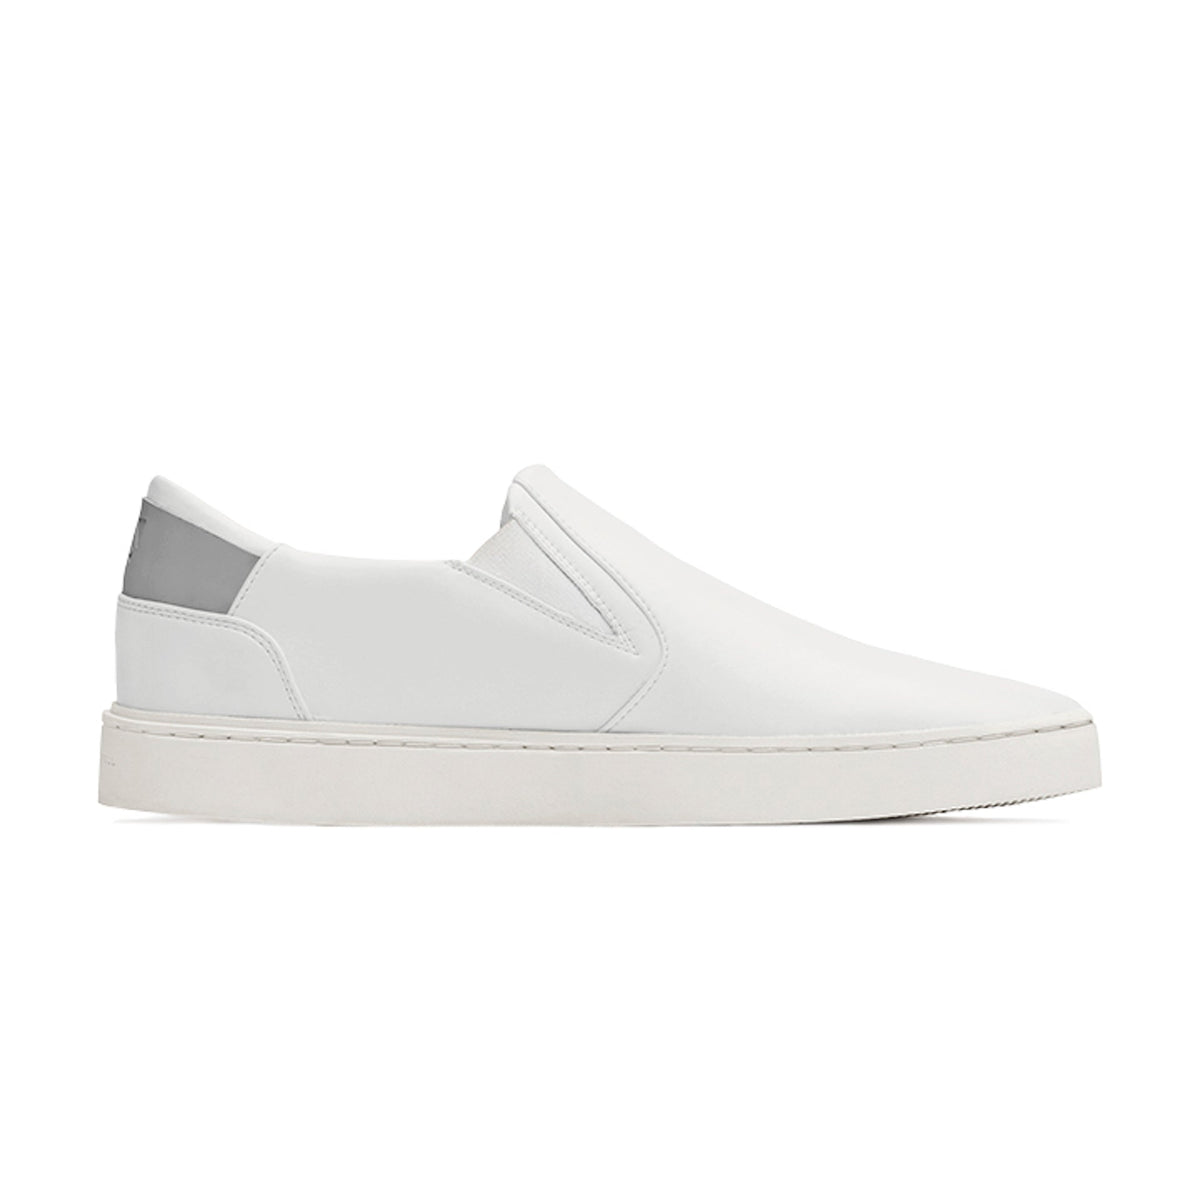 classic white slip on sneaker with sustainable design